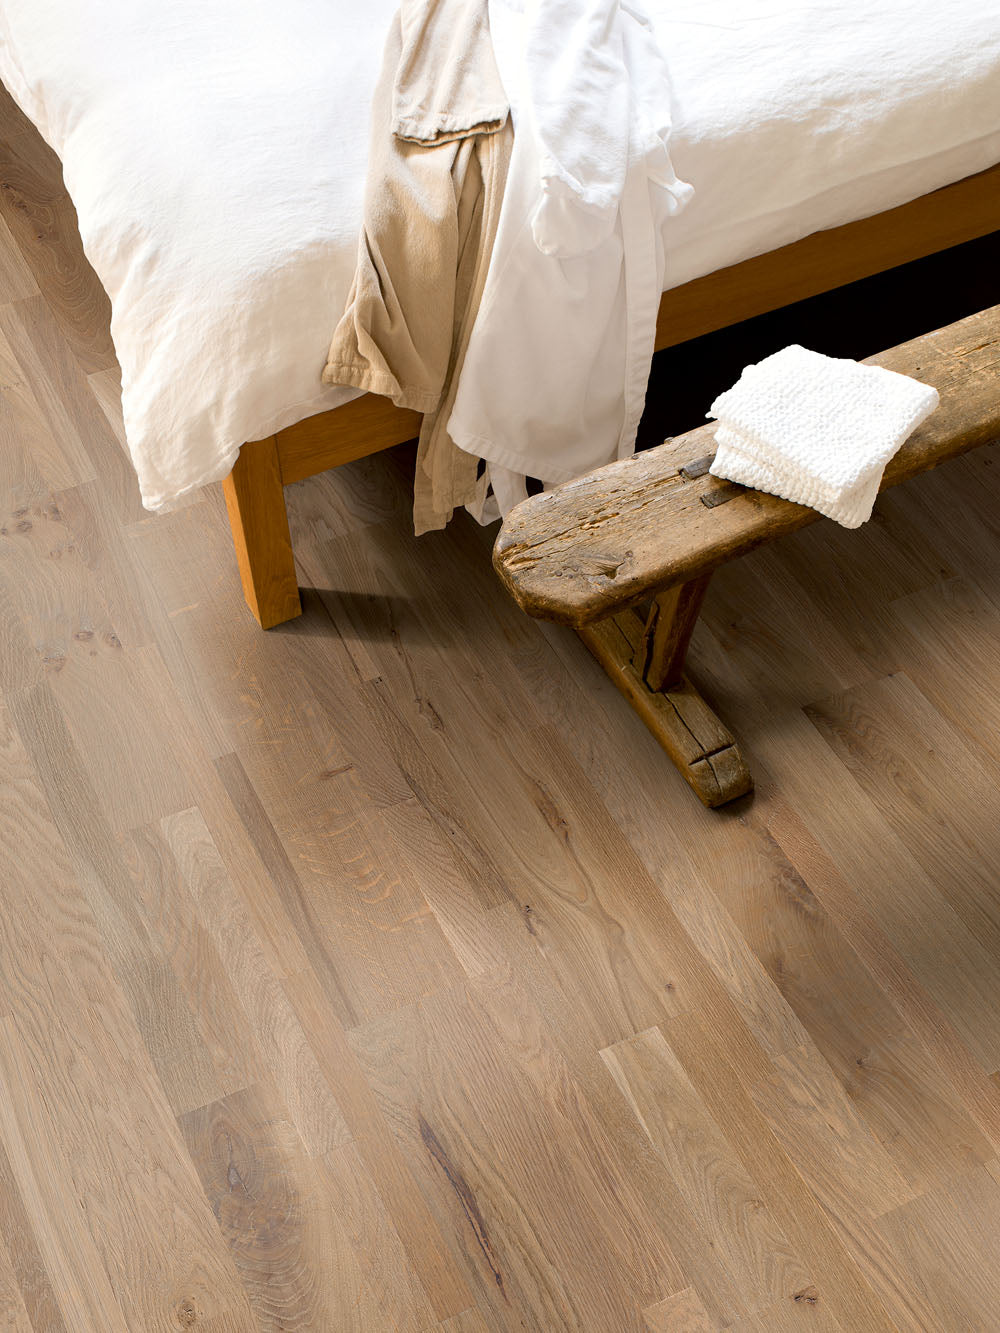 Benefits of recycled timber flooring